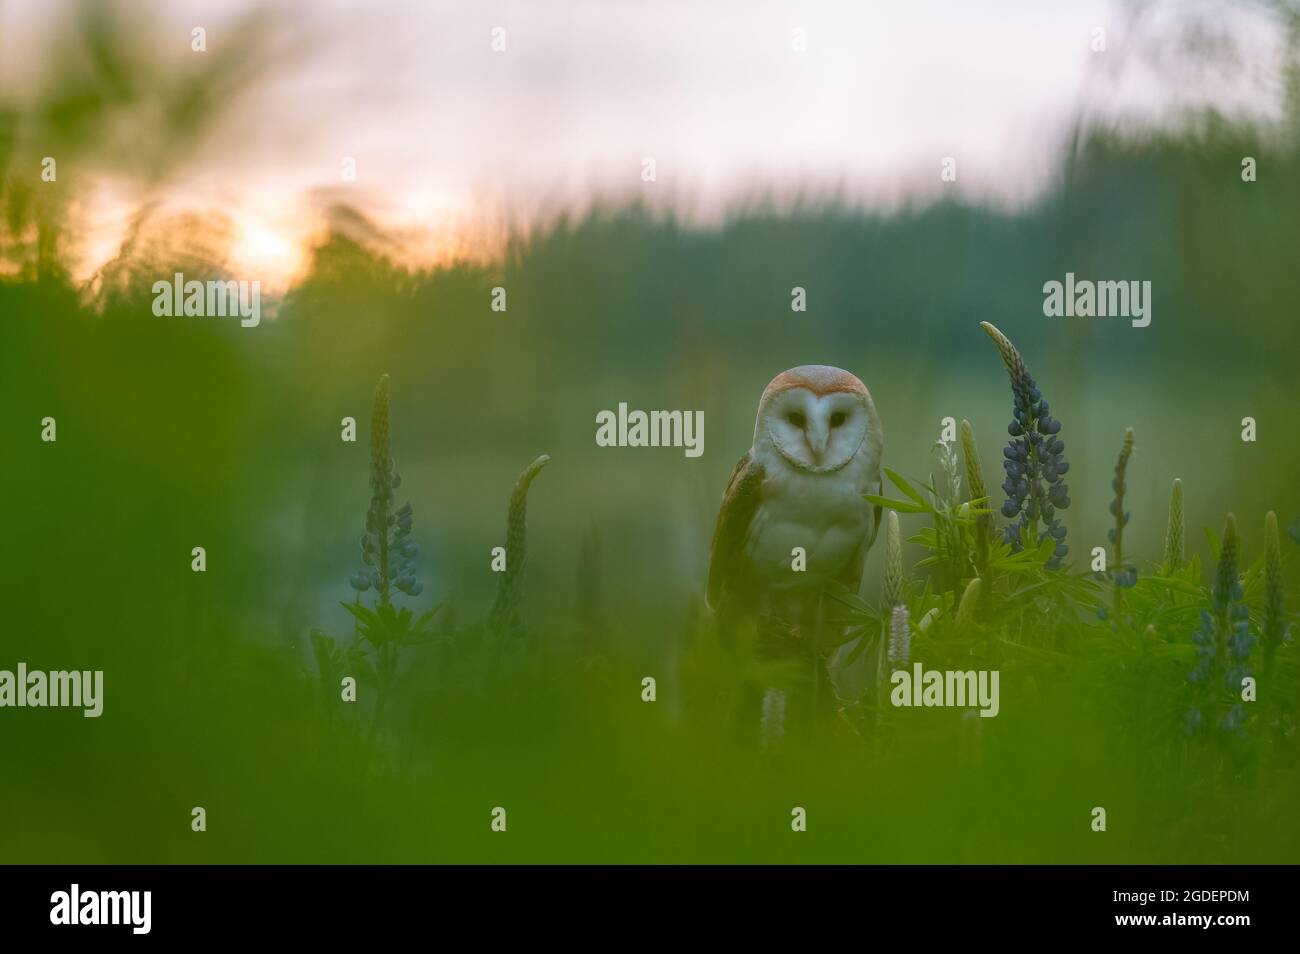 The barn owl (These albums) in a meadow at sunrise. Sitting on a stick in the grass among the blue flowers. Spring atmosphere, golden sunlight. Stock Photo